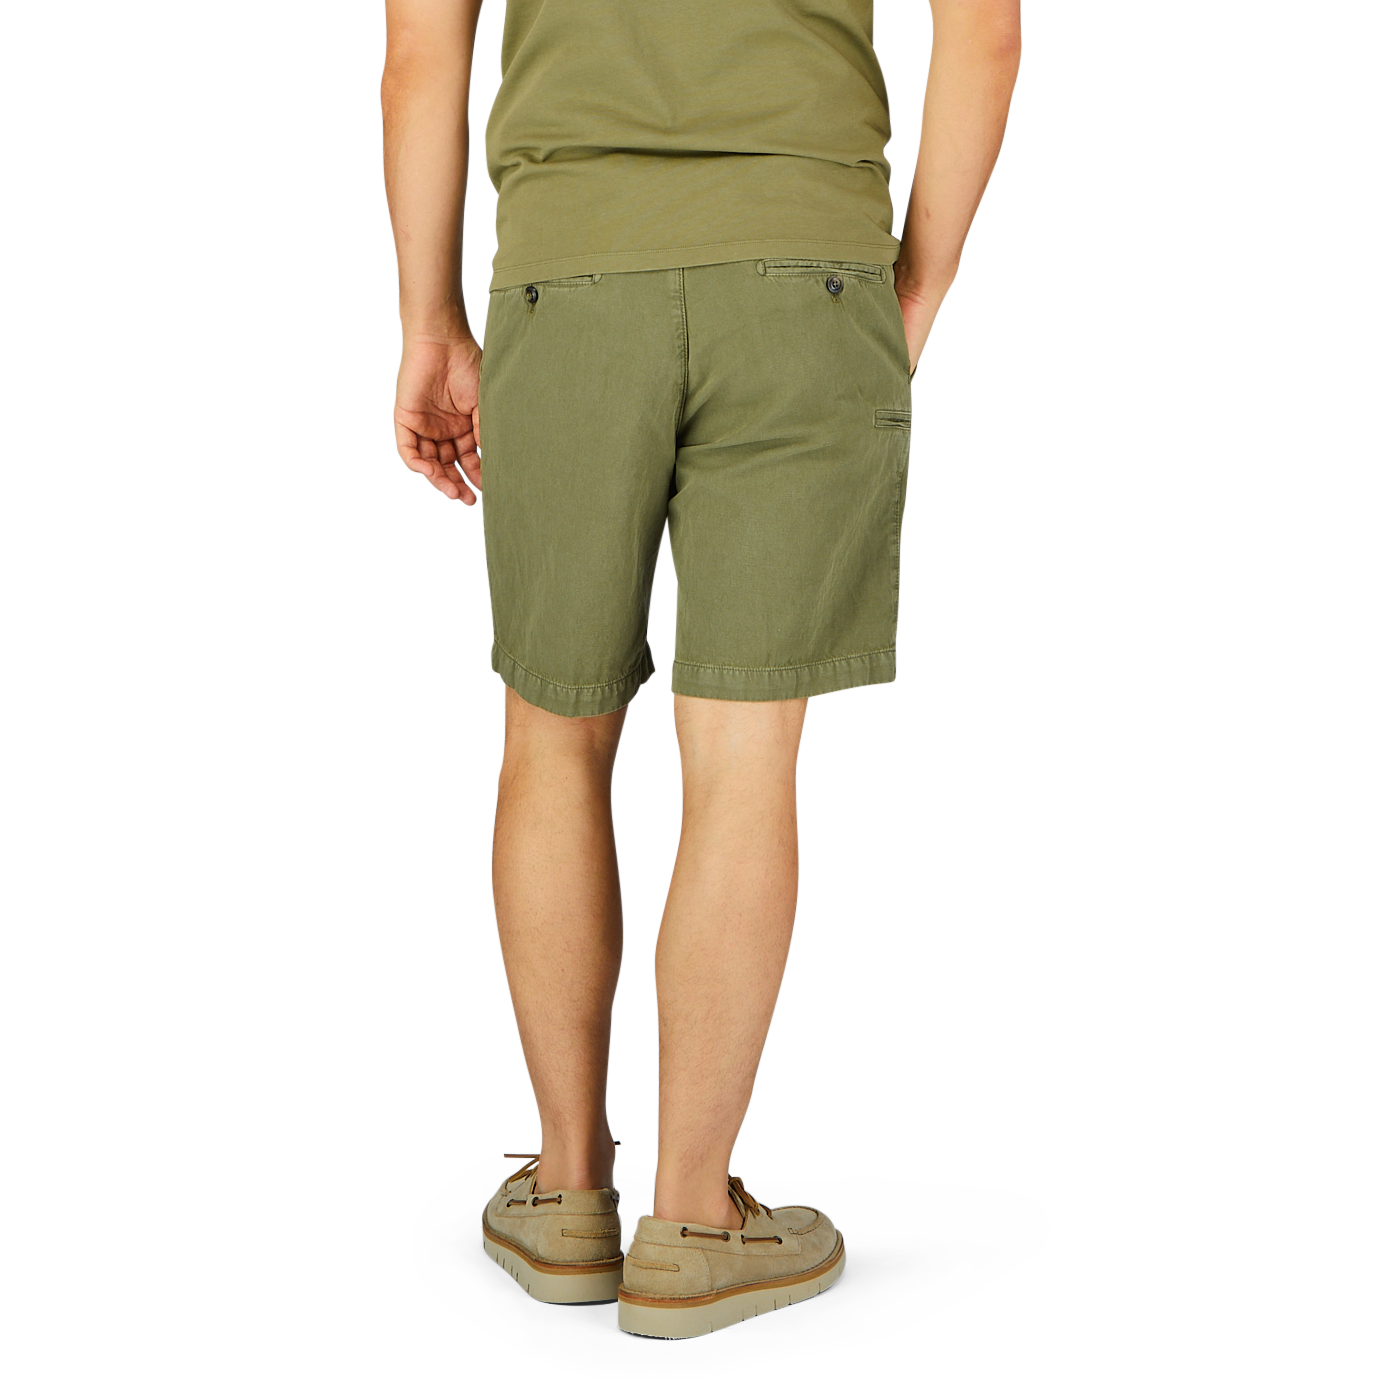 Person standing in Briglia grass green cotton linen pleated shorts and beige sandals against a white background.